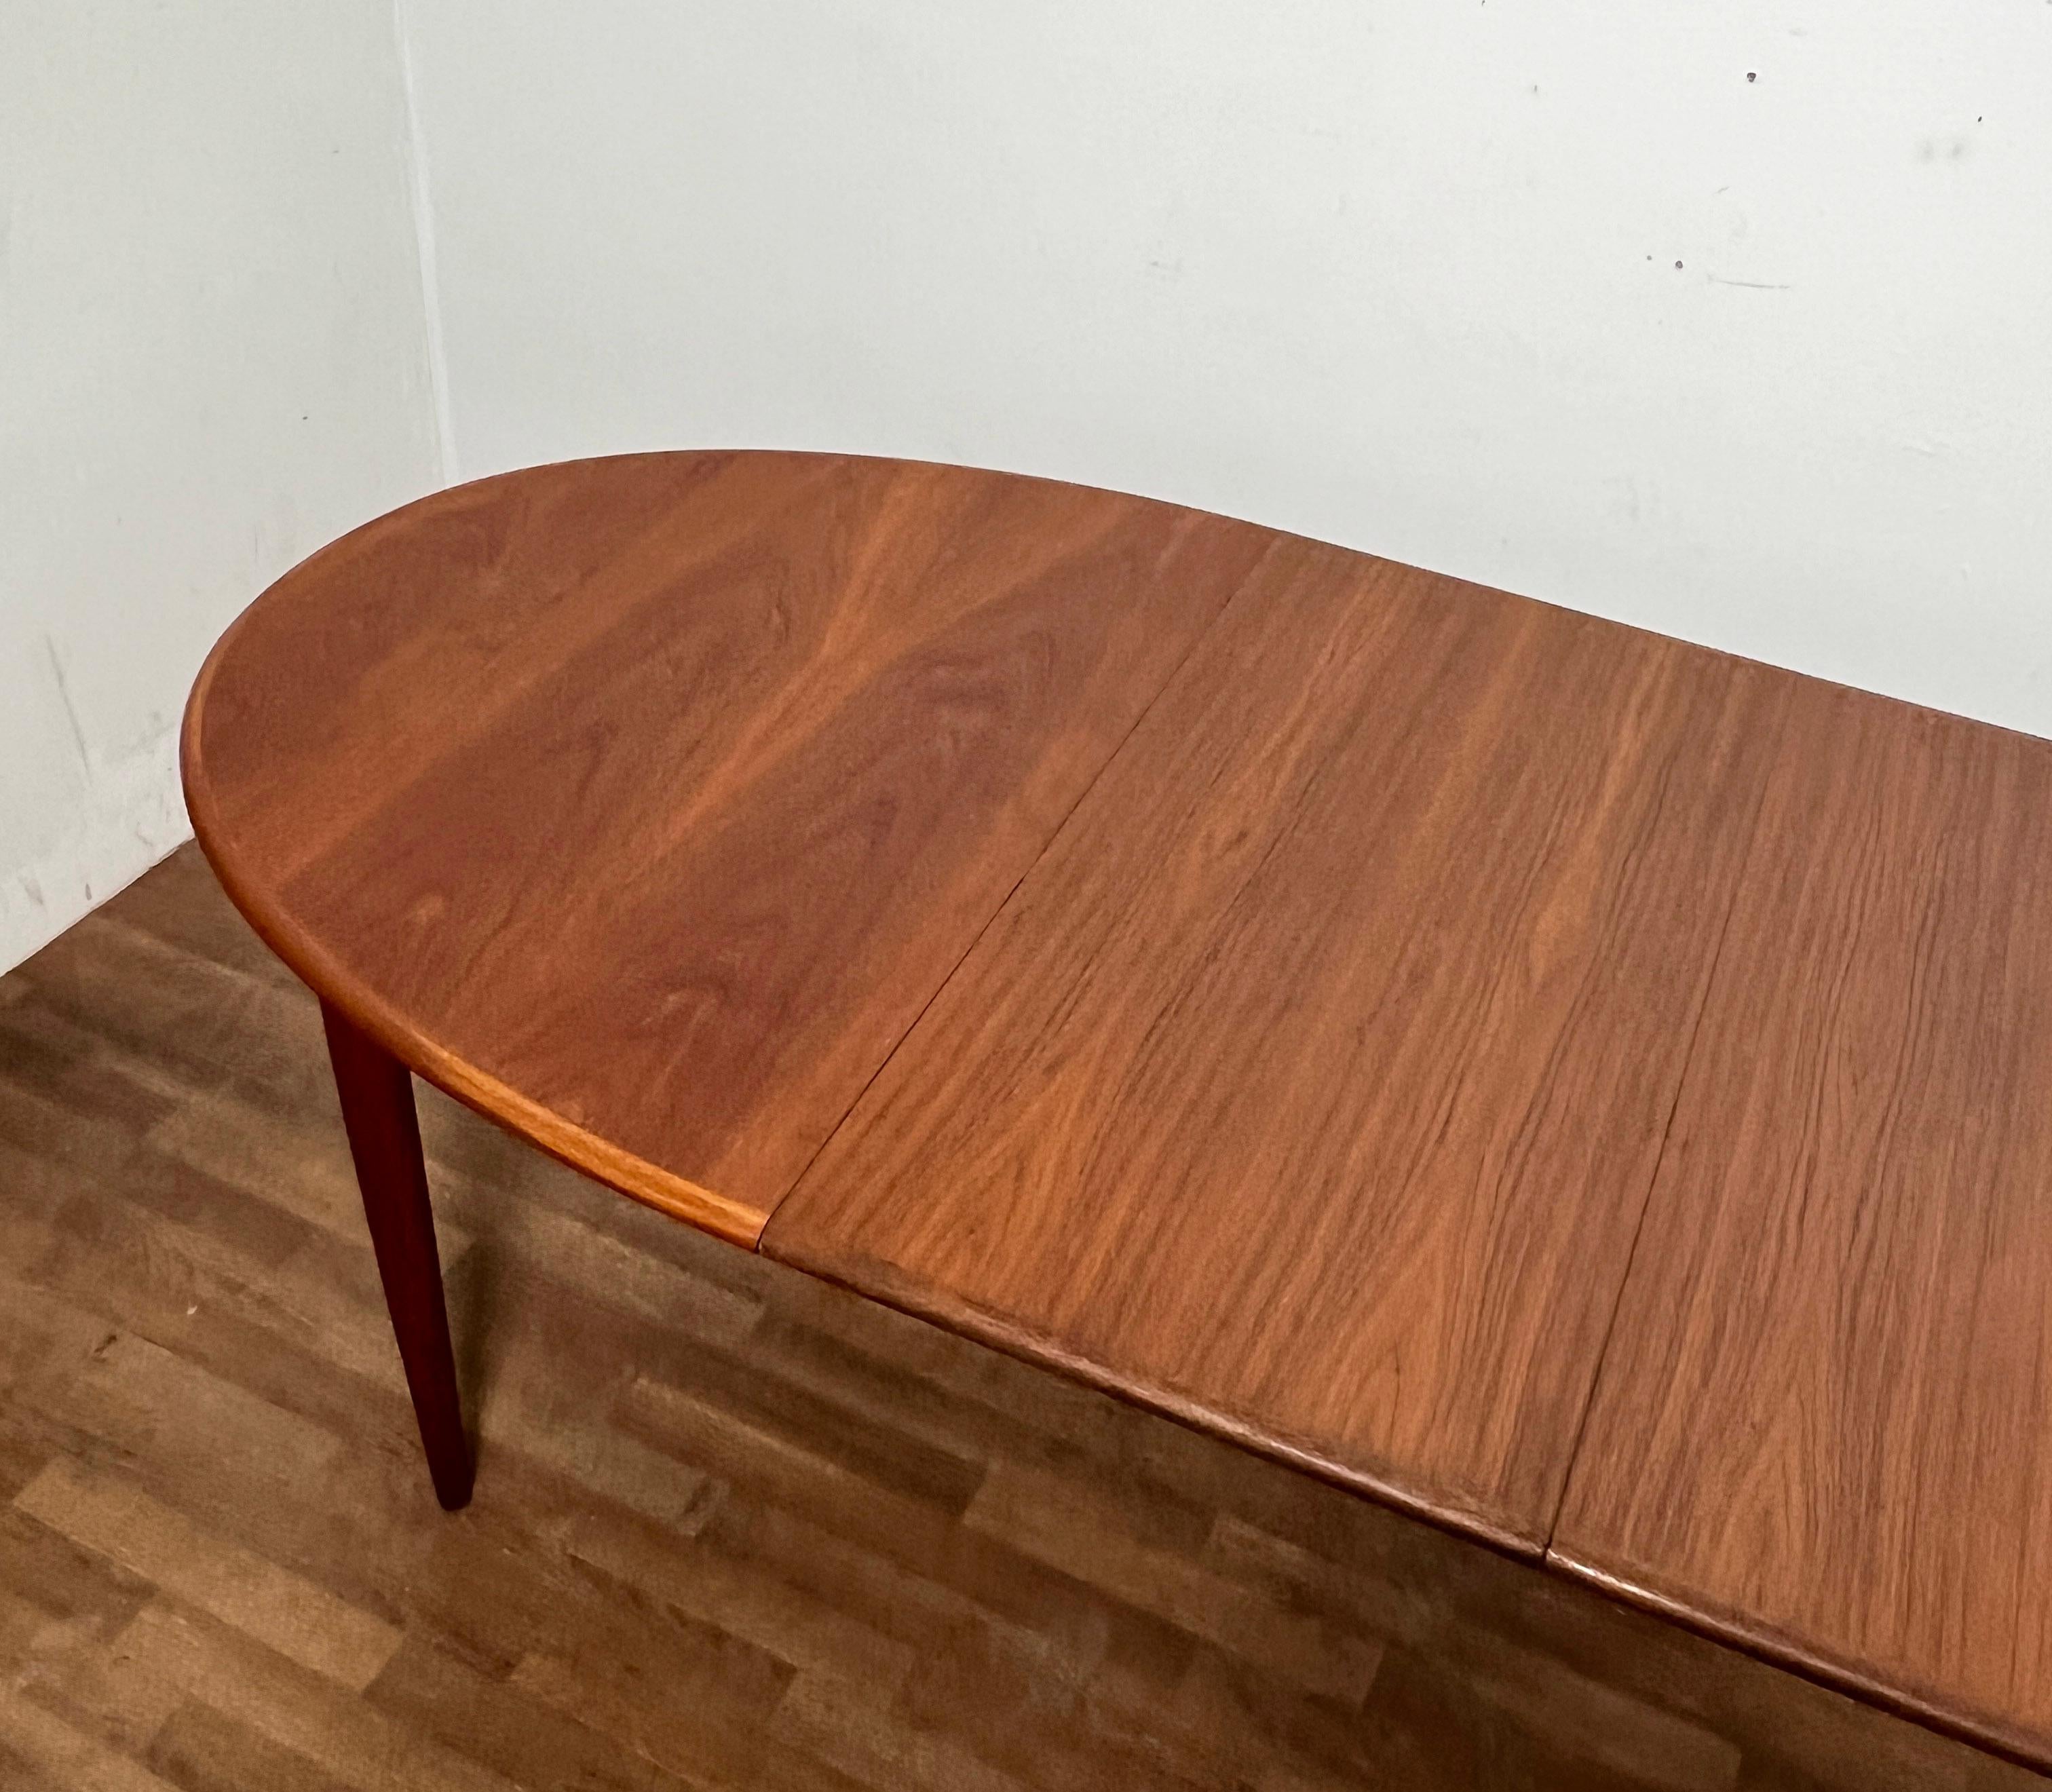 Danish Teak Oval Dining Table With Two Leaves by Gudme, Circa 1960s For Sale 2